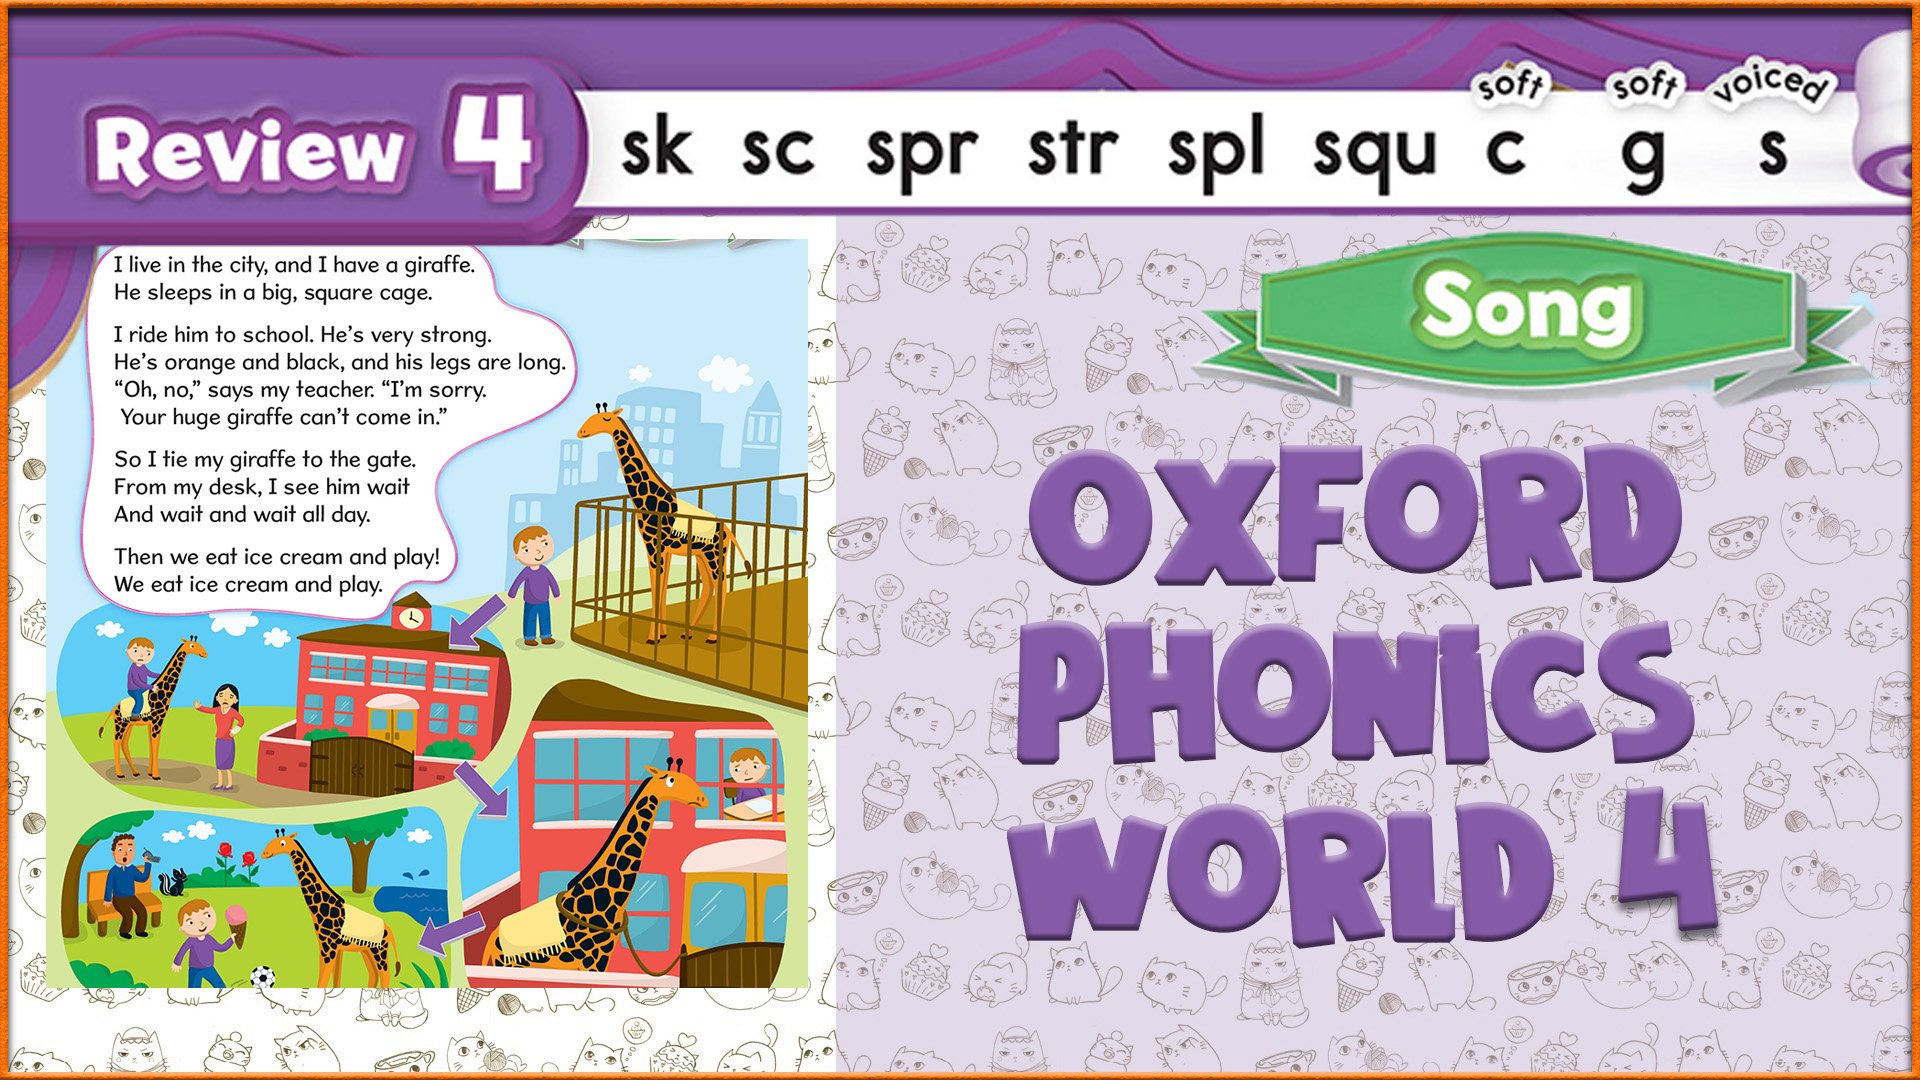 Song | Review 4 | Oxford Phonics World 4 - Consonant Blends. #53